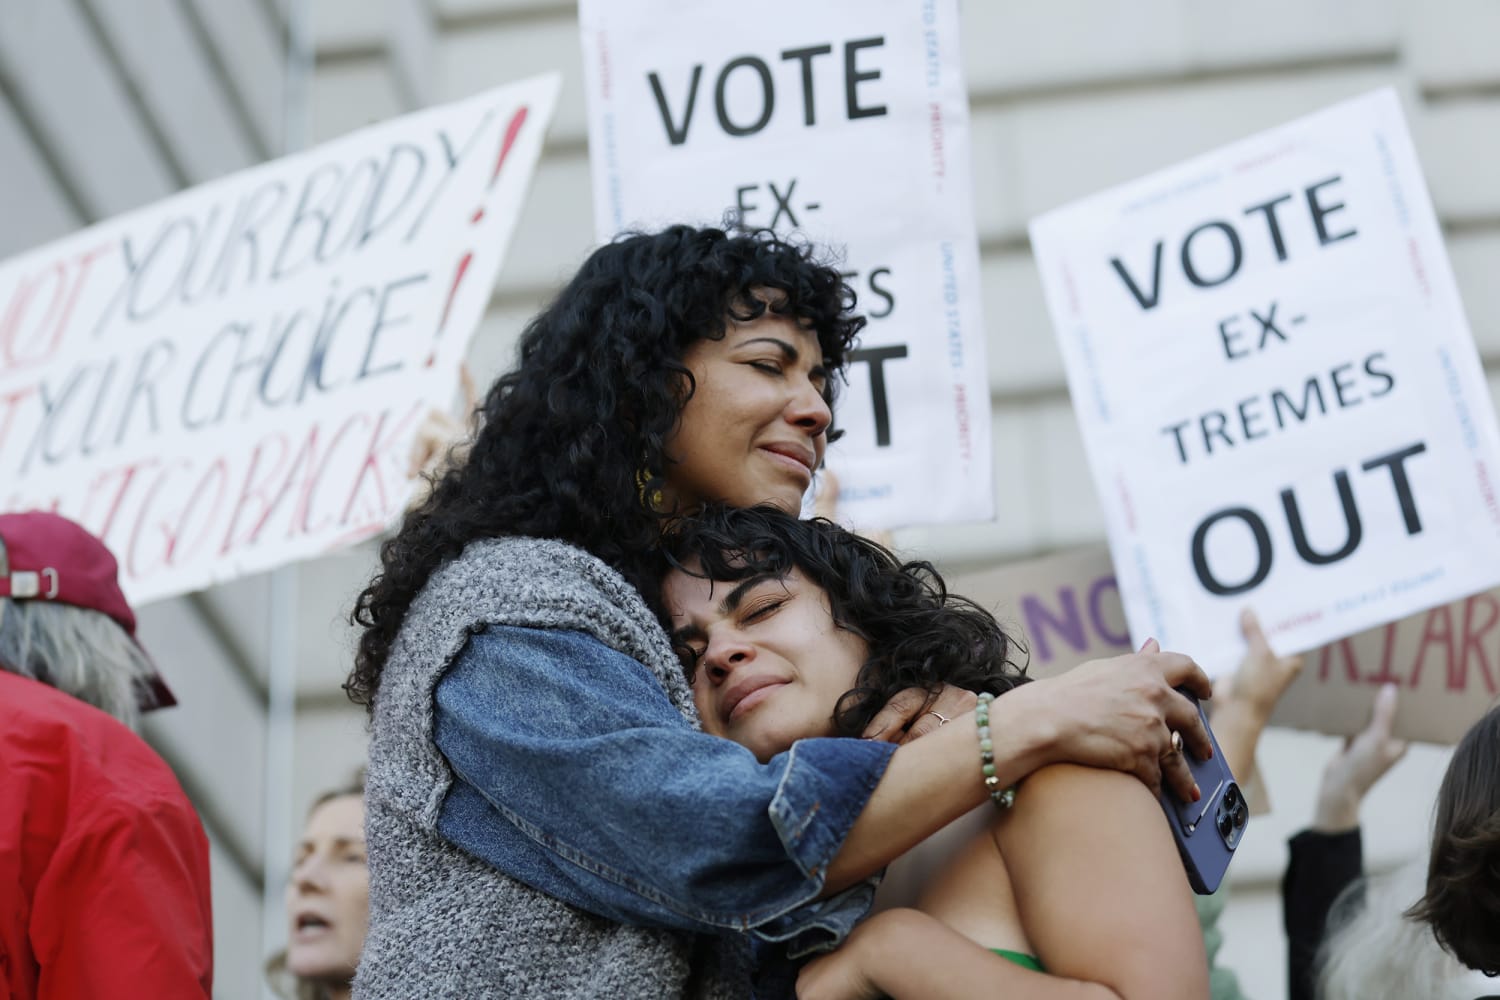 Abortion bans affect Latinas the most among women of color, new report finds